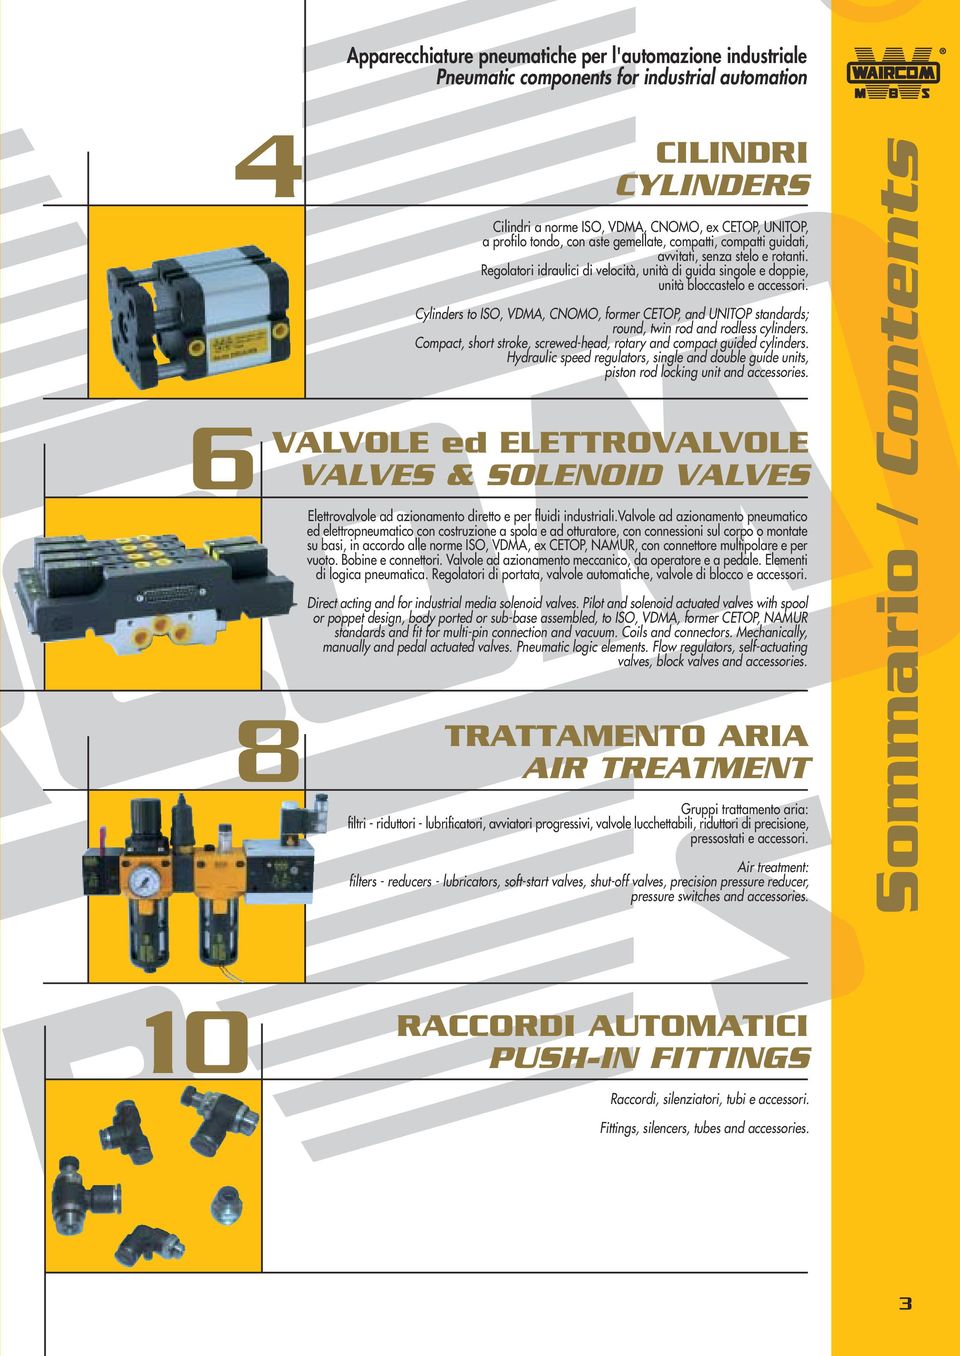 Cylinders to ISO, VDMA, CNOMO, former CETOP, and UNITOP standards; round, twin rod and rodless cylinders. Compact, short stroke, screwed-head, rotary and compact guided cylinders.